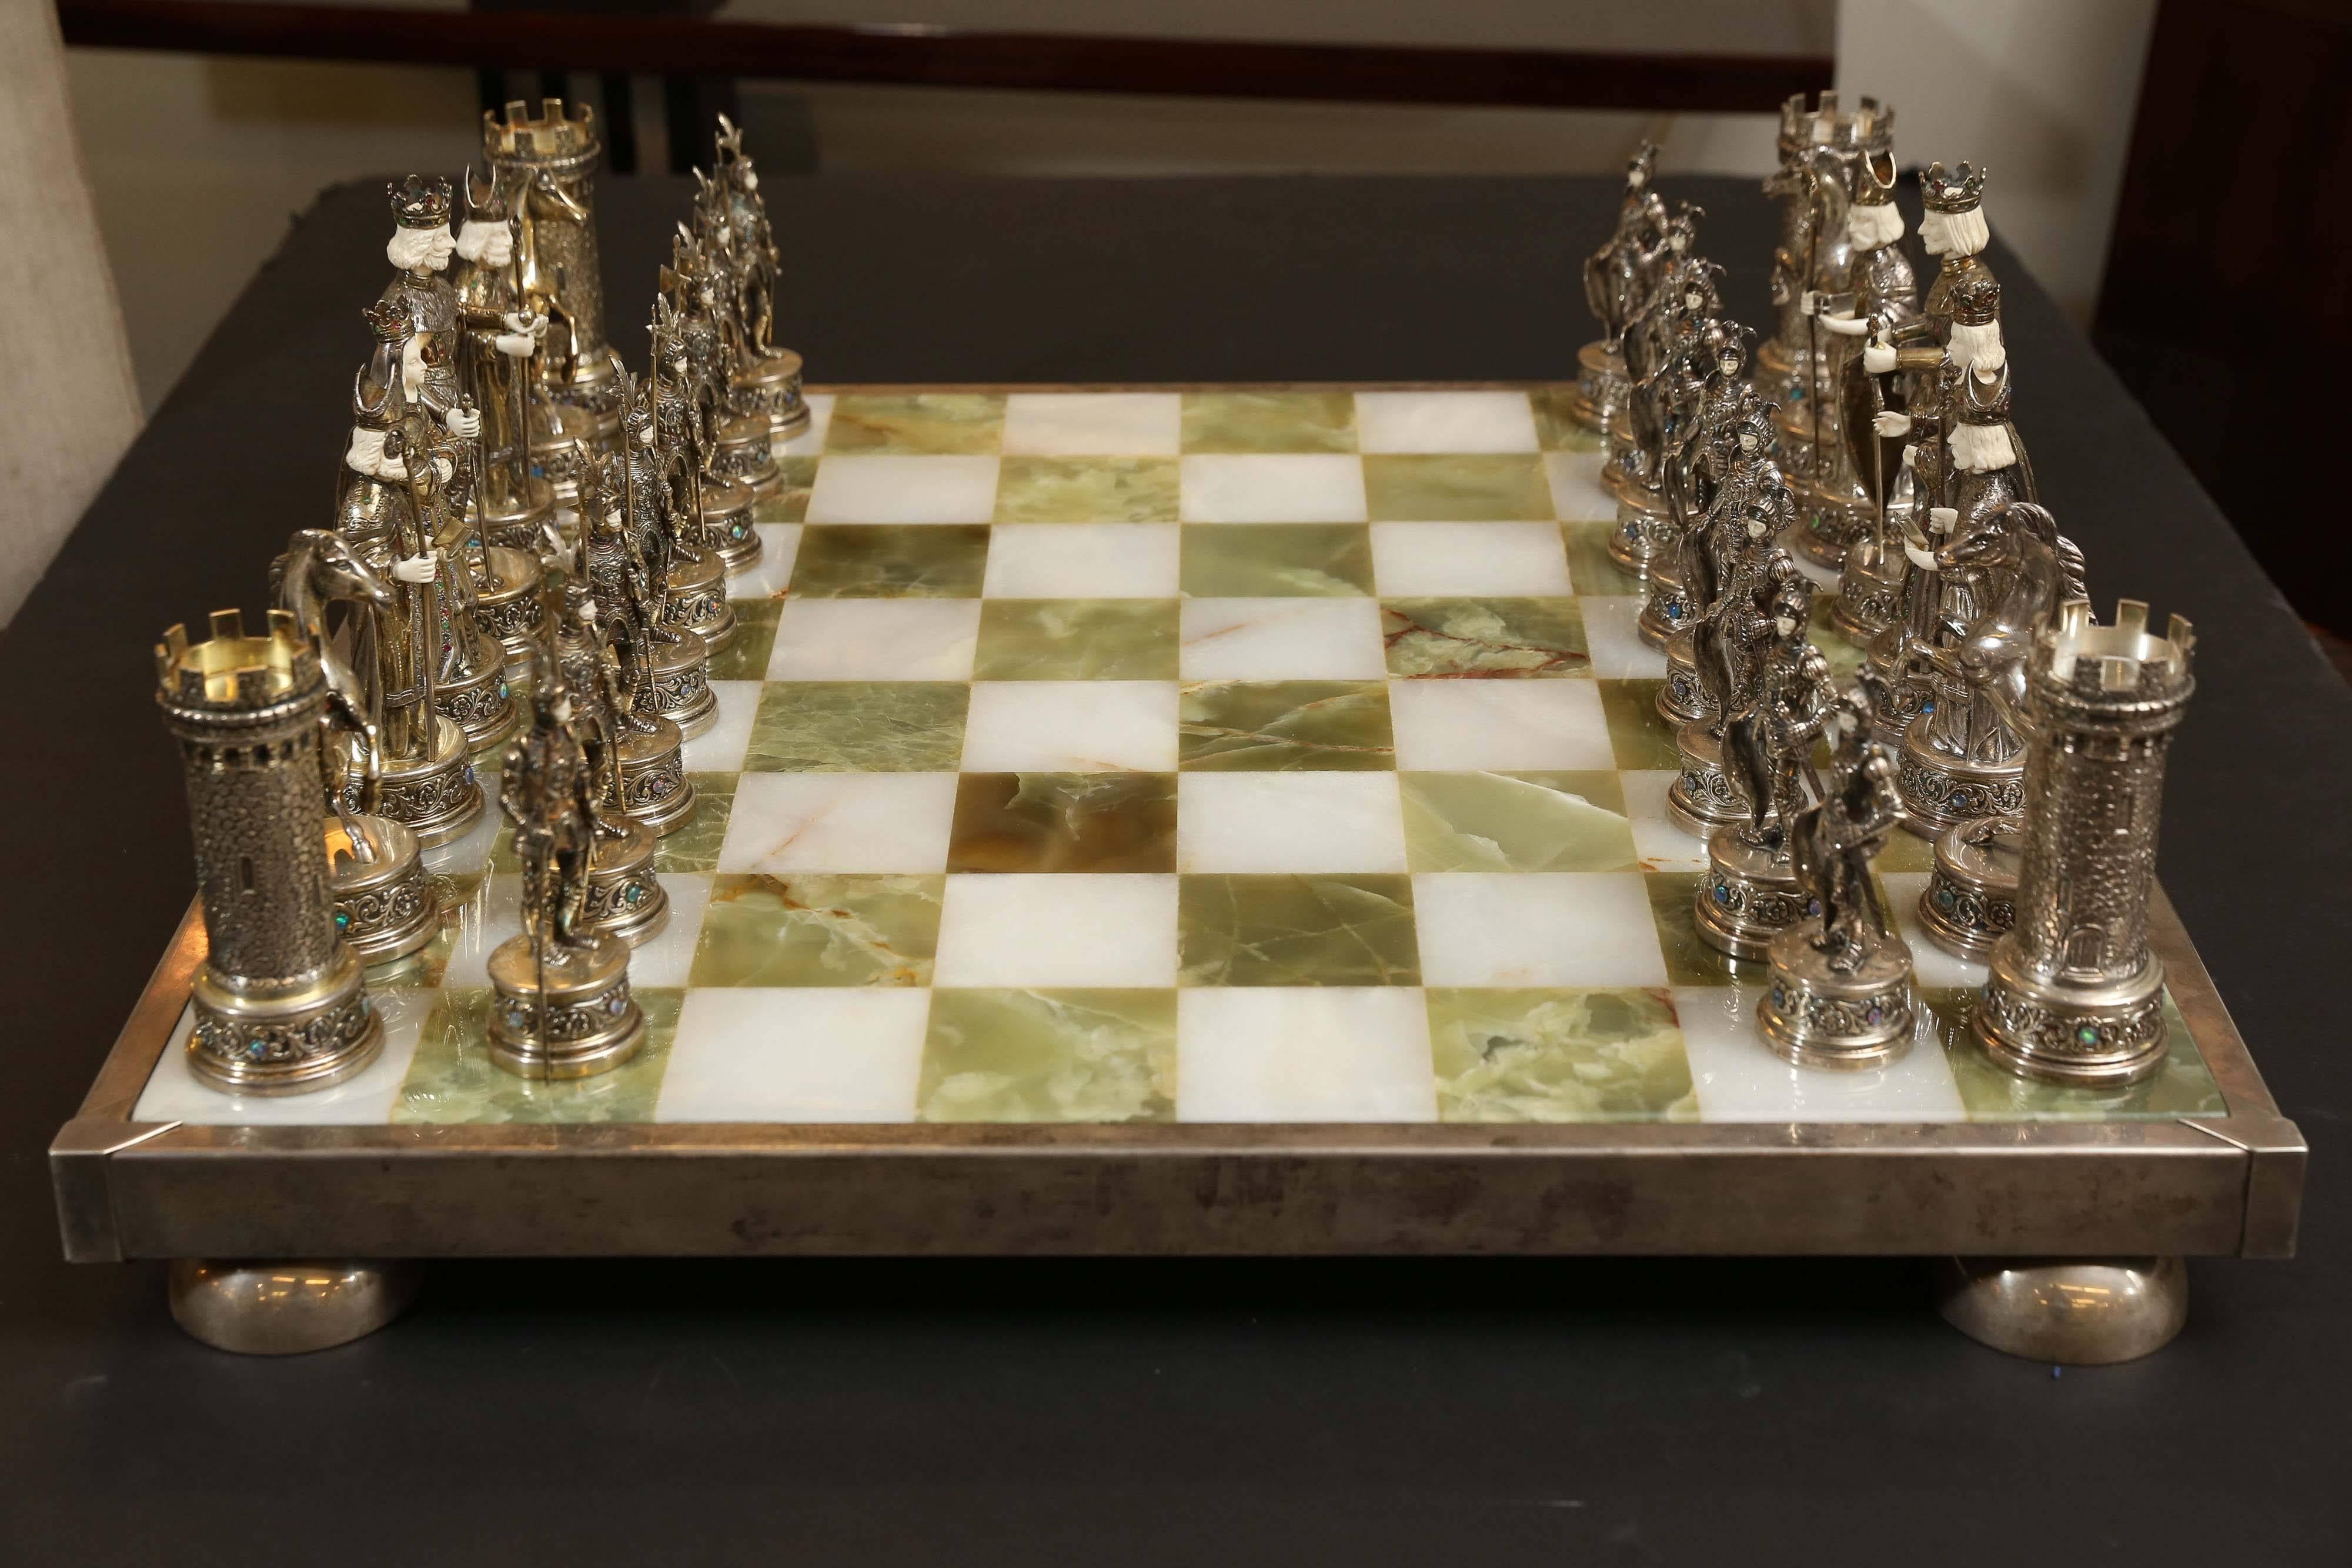 The magnificent 32 pieces chess set is made, circa 1900-1910 in Germany for export to England. The figures made out of sterling silver and gold washed sterling silver, stamped 